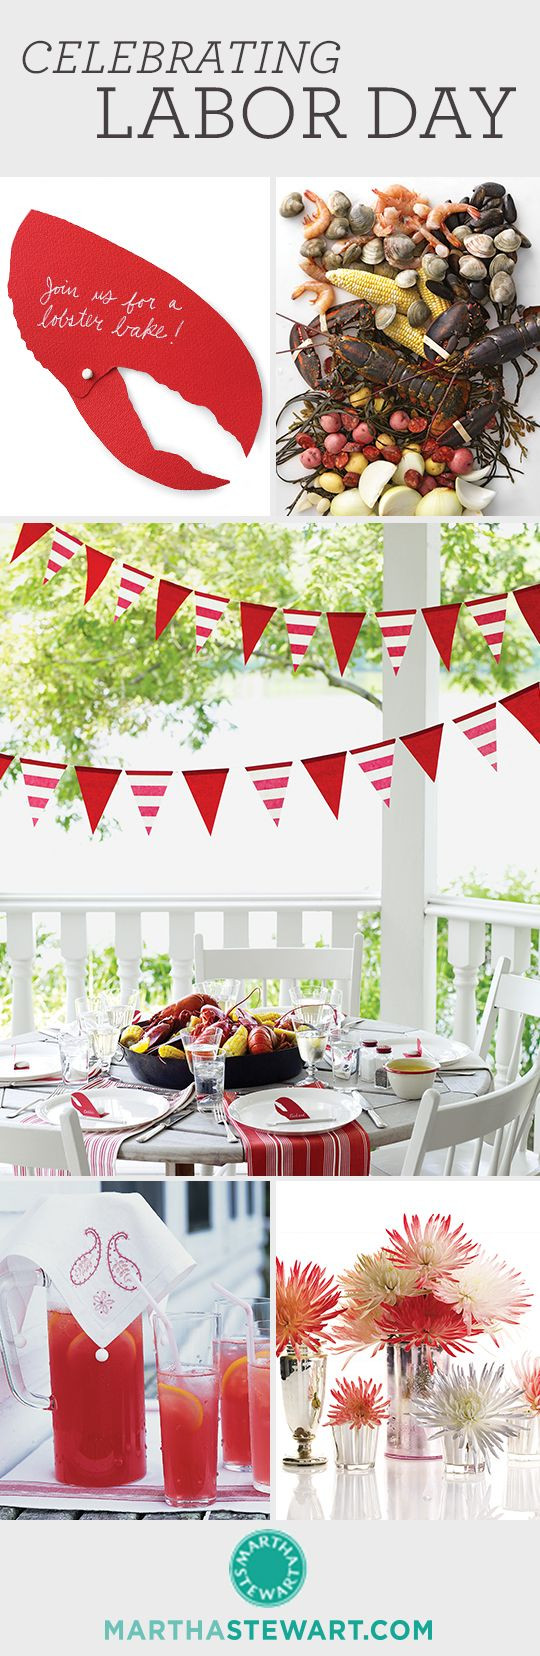 Labor Day Decorating Ideas
 Celebrate Labor Day with our invitations decor ideas and